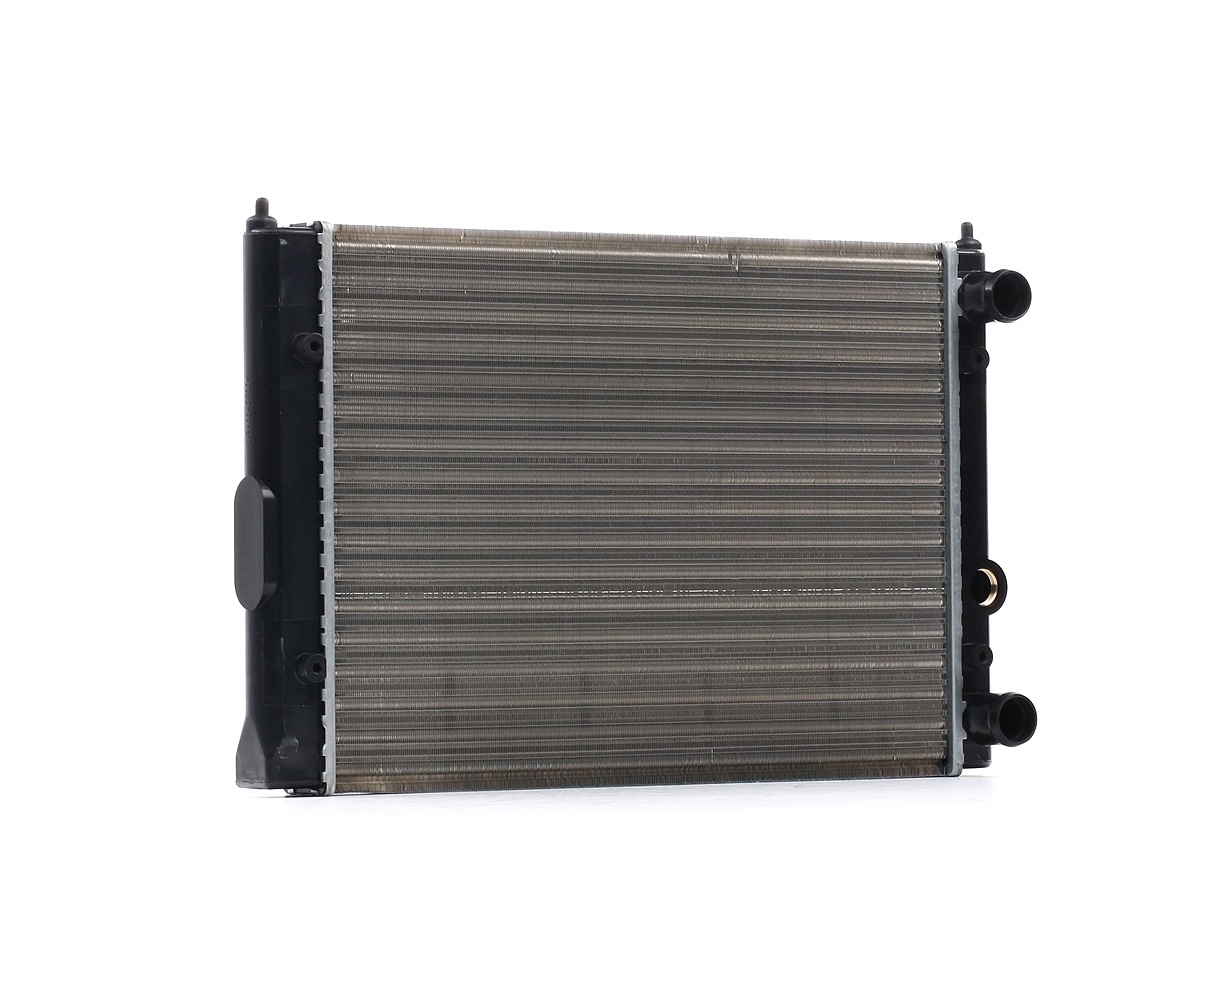 STARK SKRD-0120093 Engine radiator Aluminium, for vehicles without air conditioning, Manual Transmission